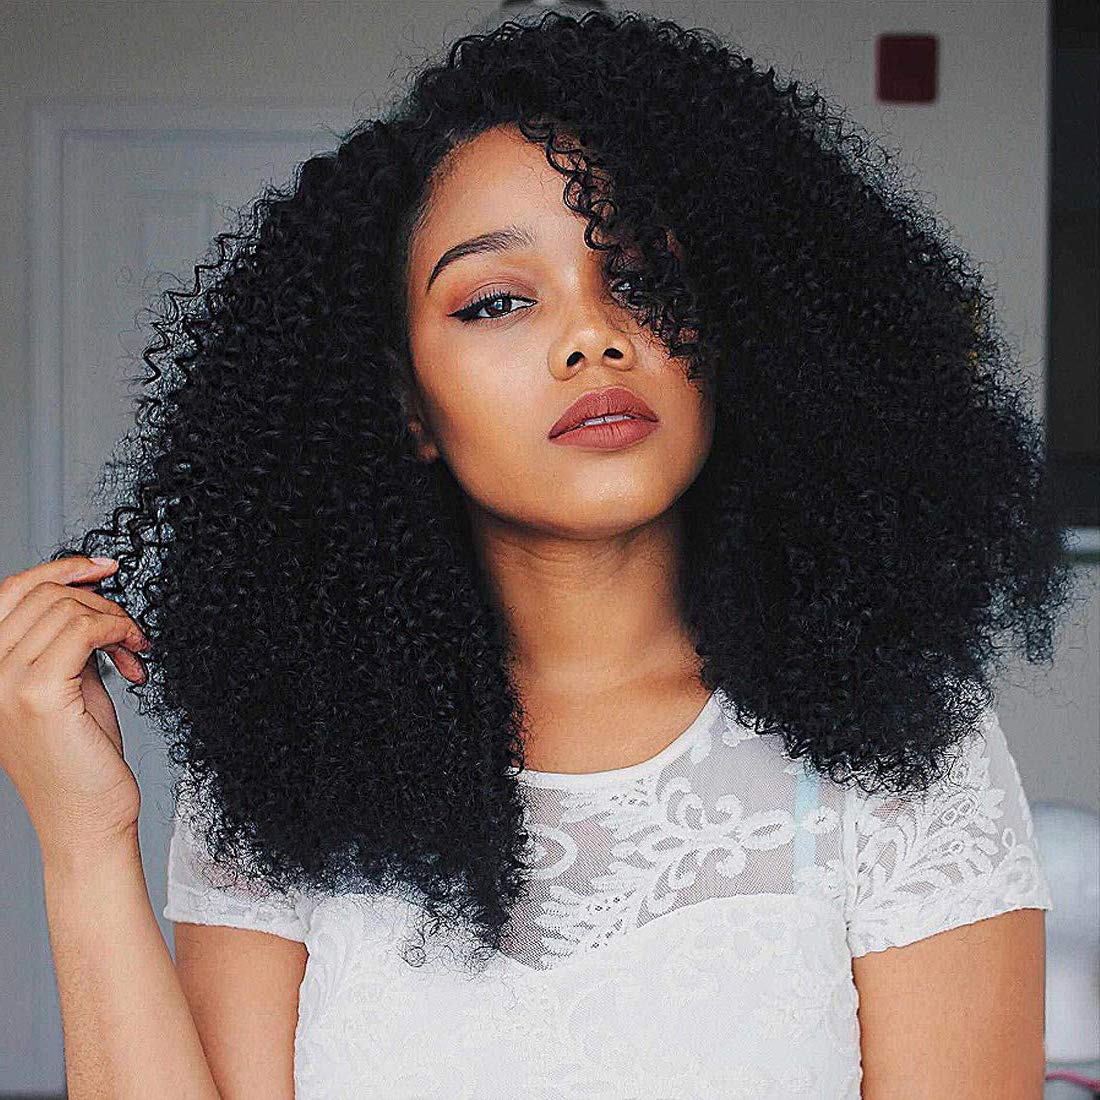 10 things you should know before buying curly wigs